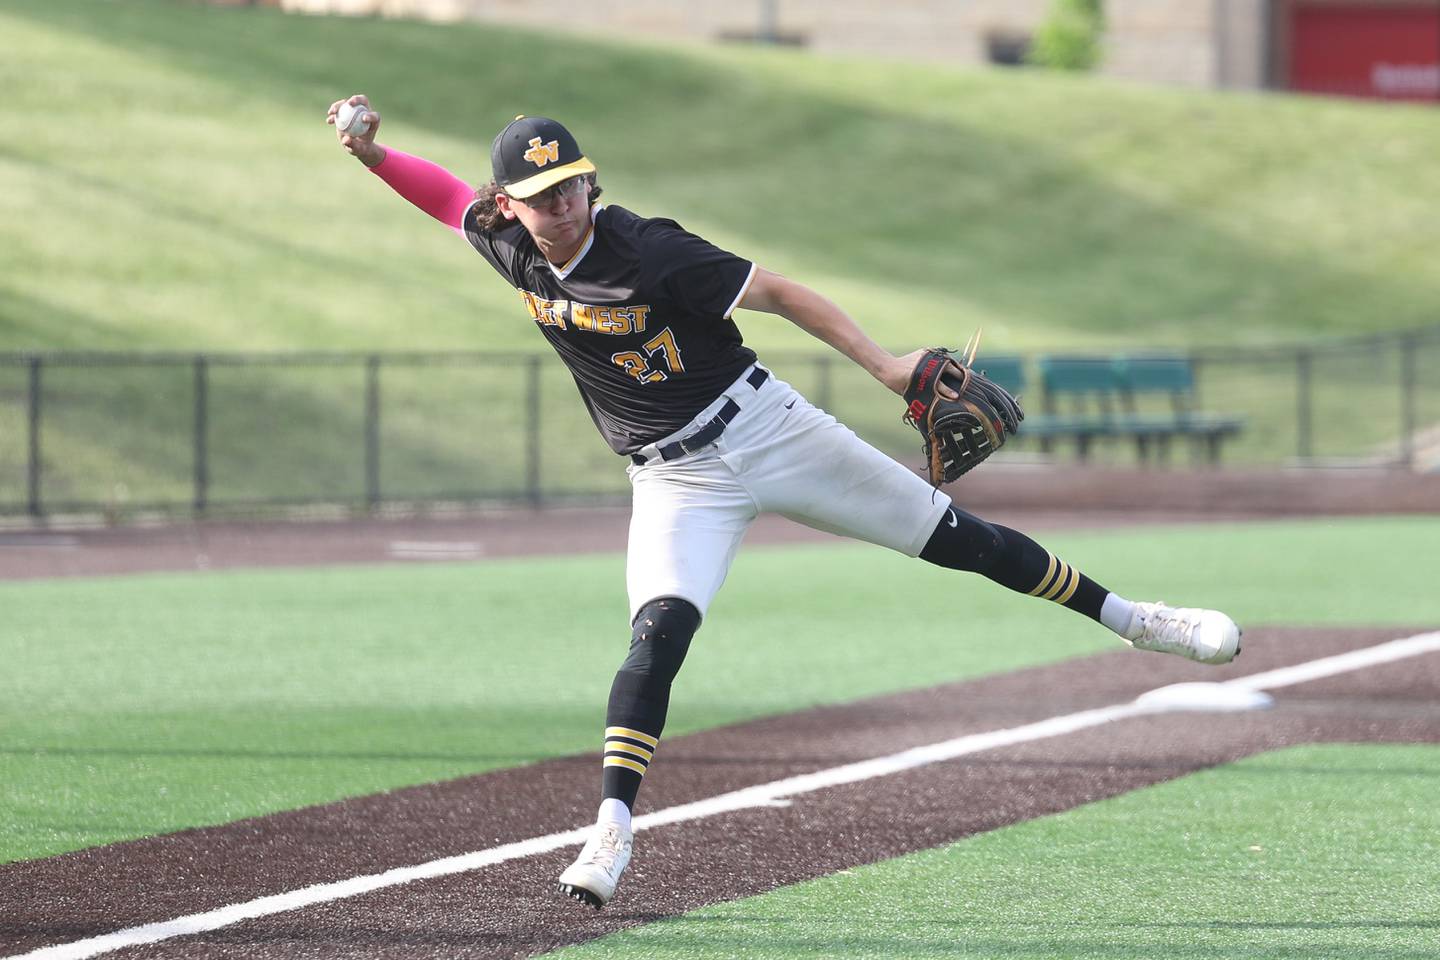 Joliet West’s James Love makes a throw to first against Joliet Central on Thursday, May 11, 2023 in Joliet.